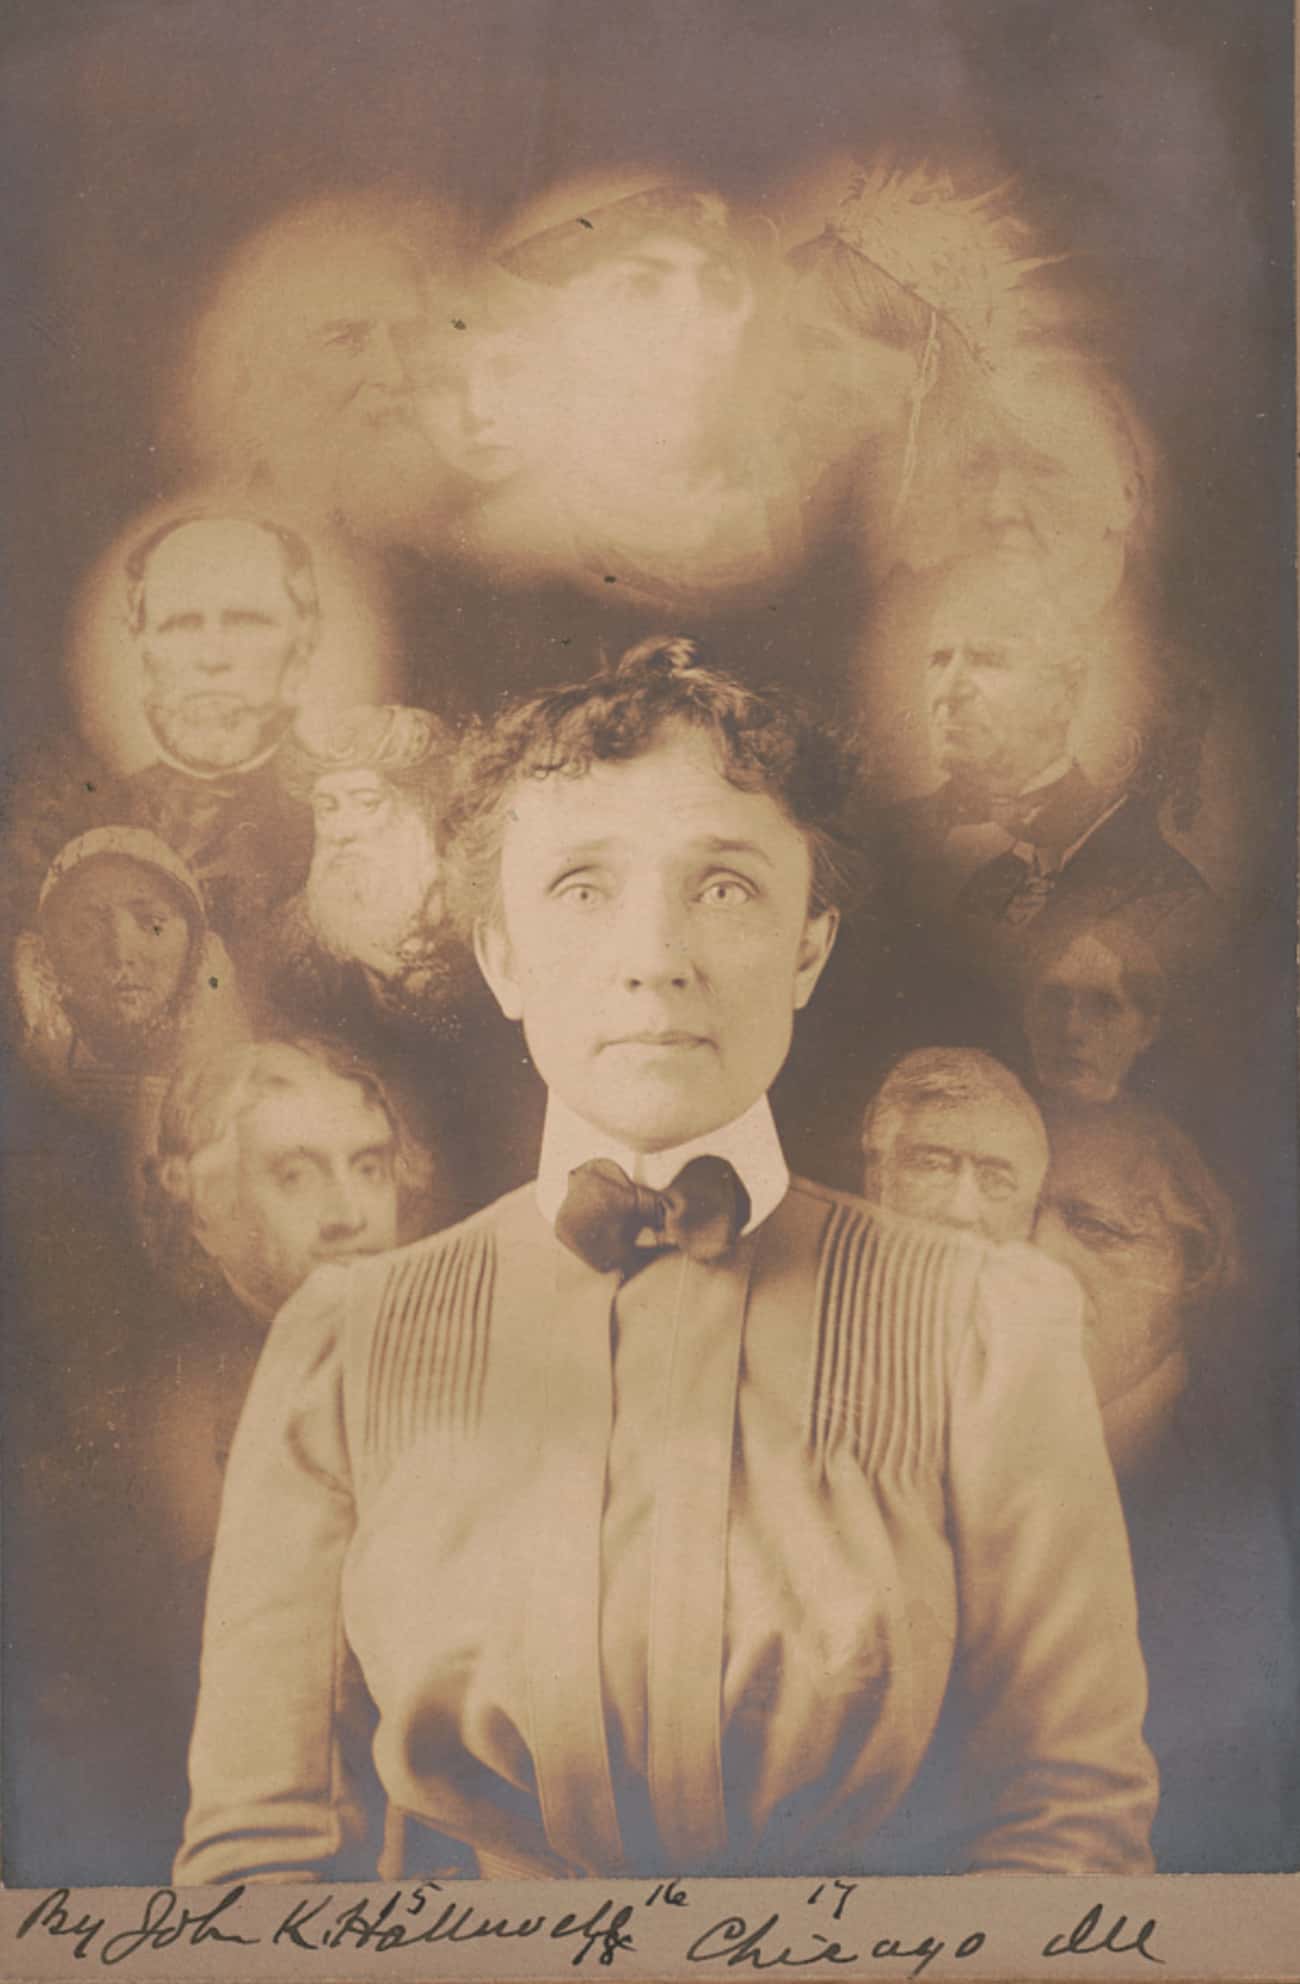 Spirit Photography Claimed To Capture Images Of Ghosts